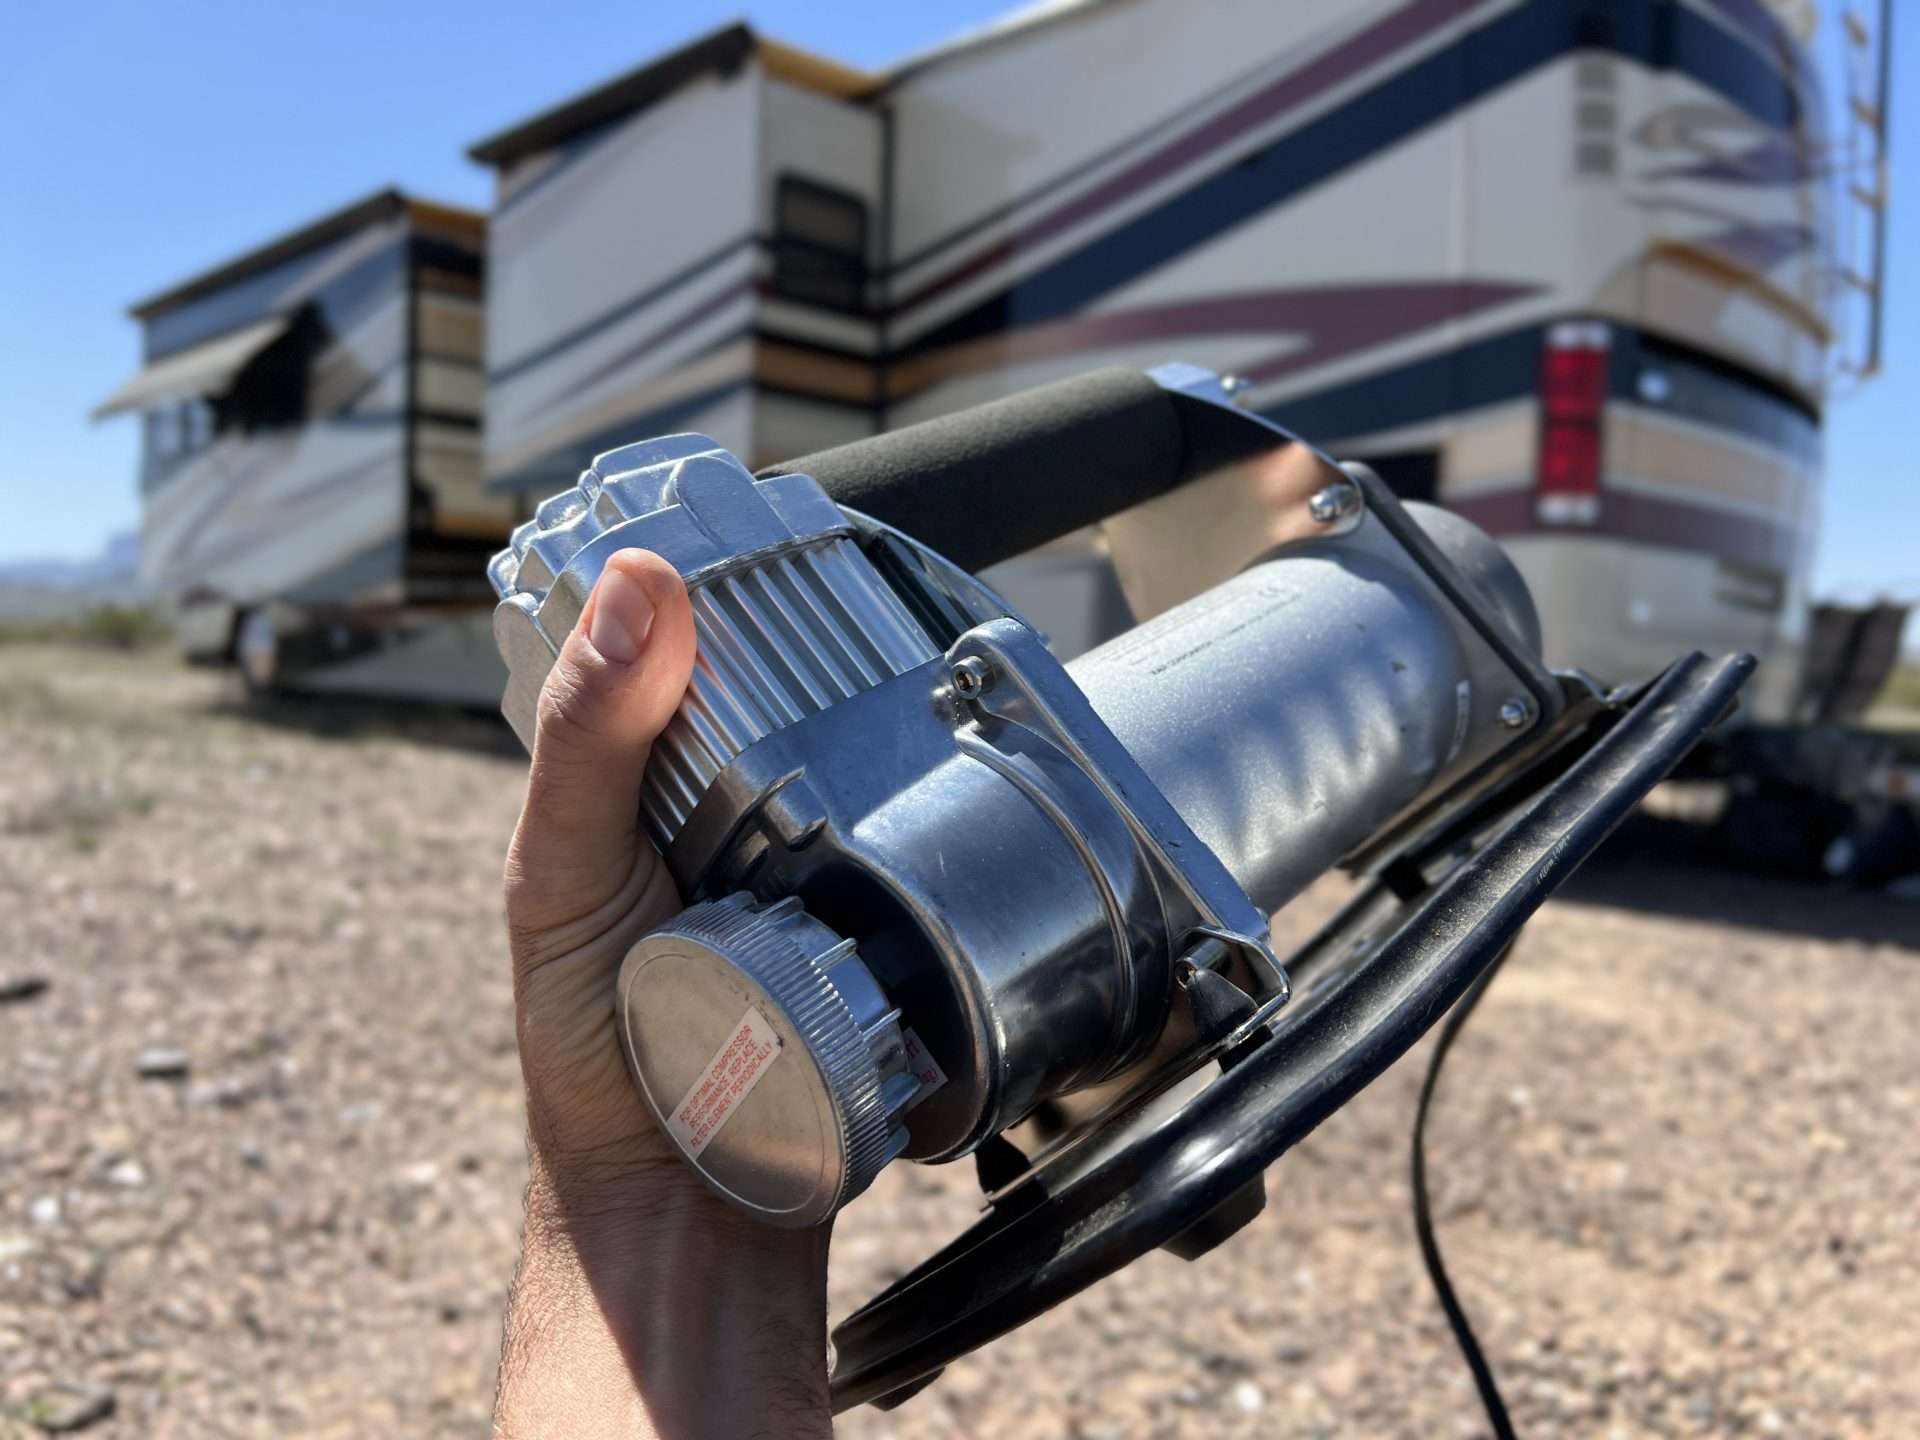 Portable air compressor being held up in front of an RV